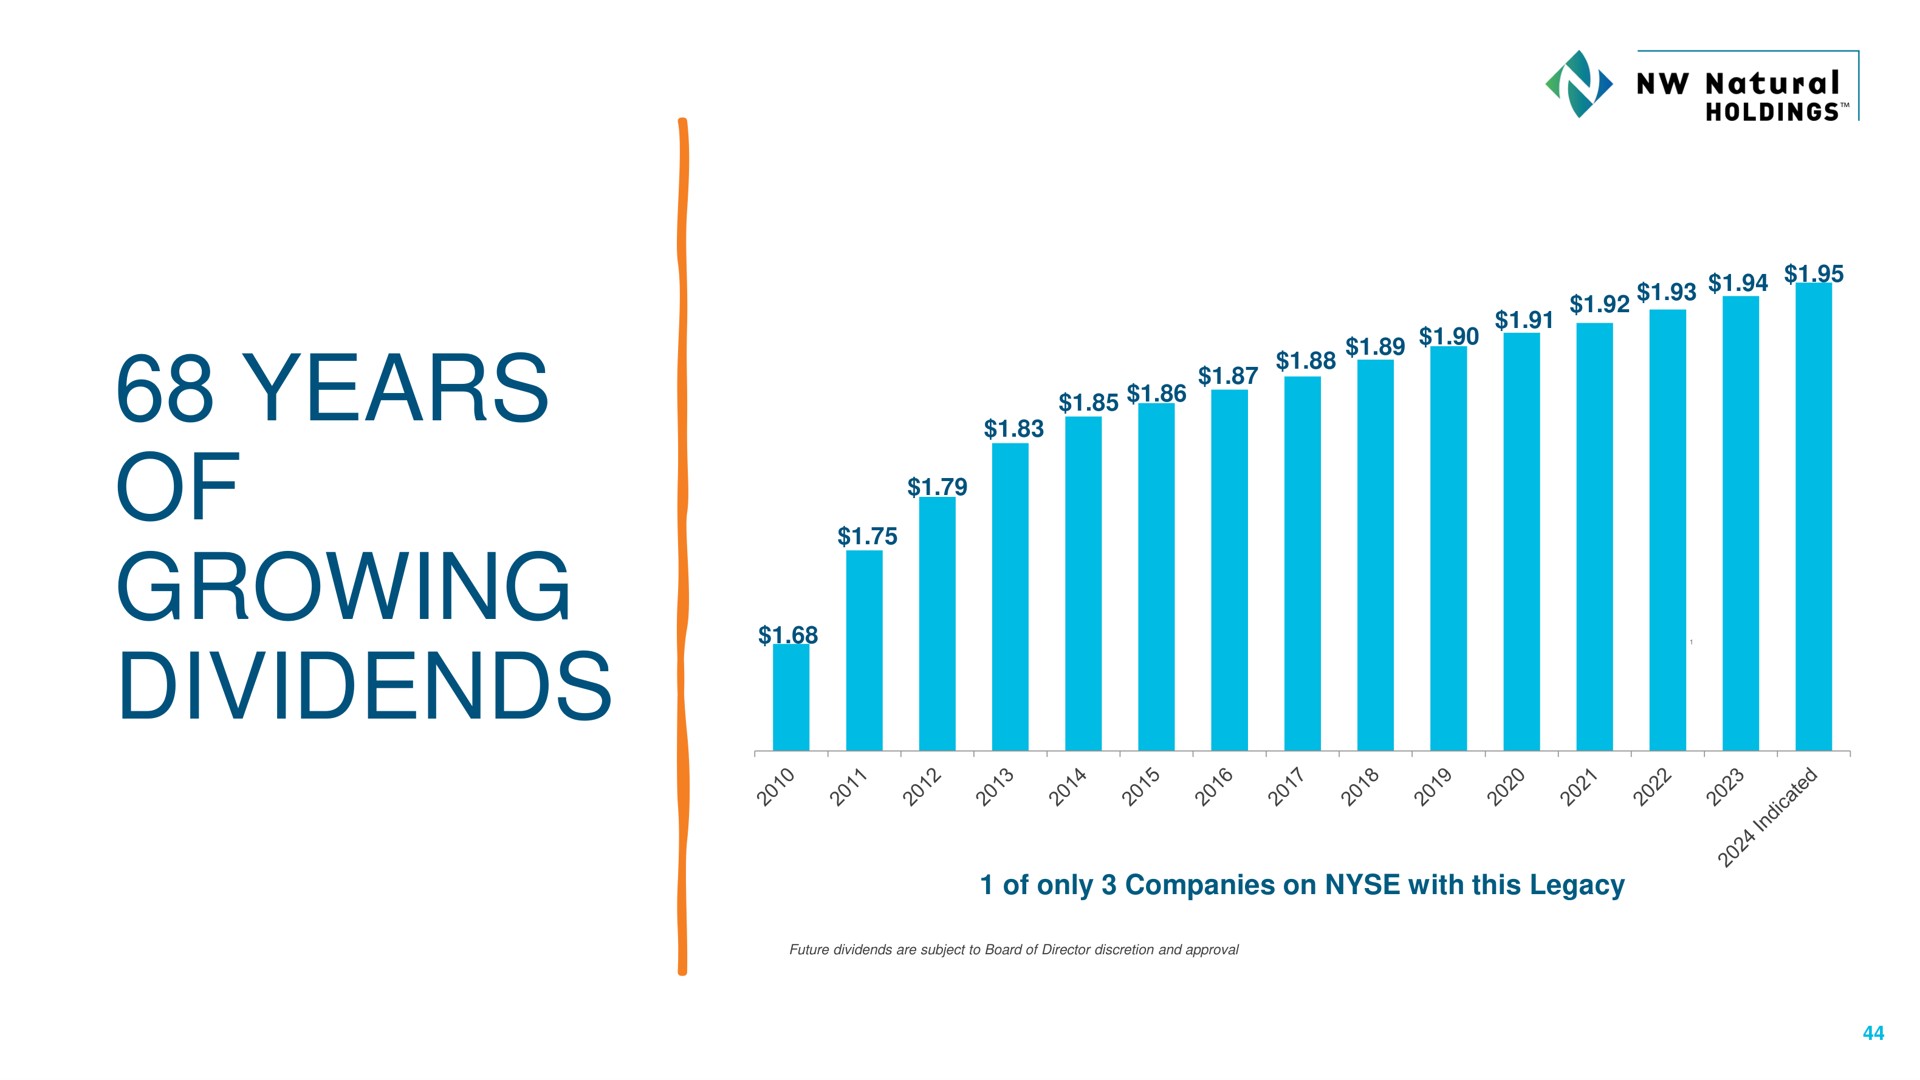 years of growing dividends paces | NW Natural Holdings